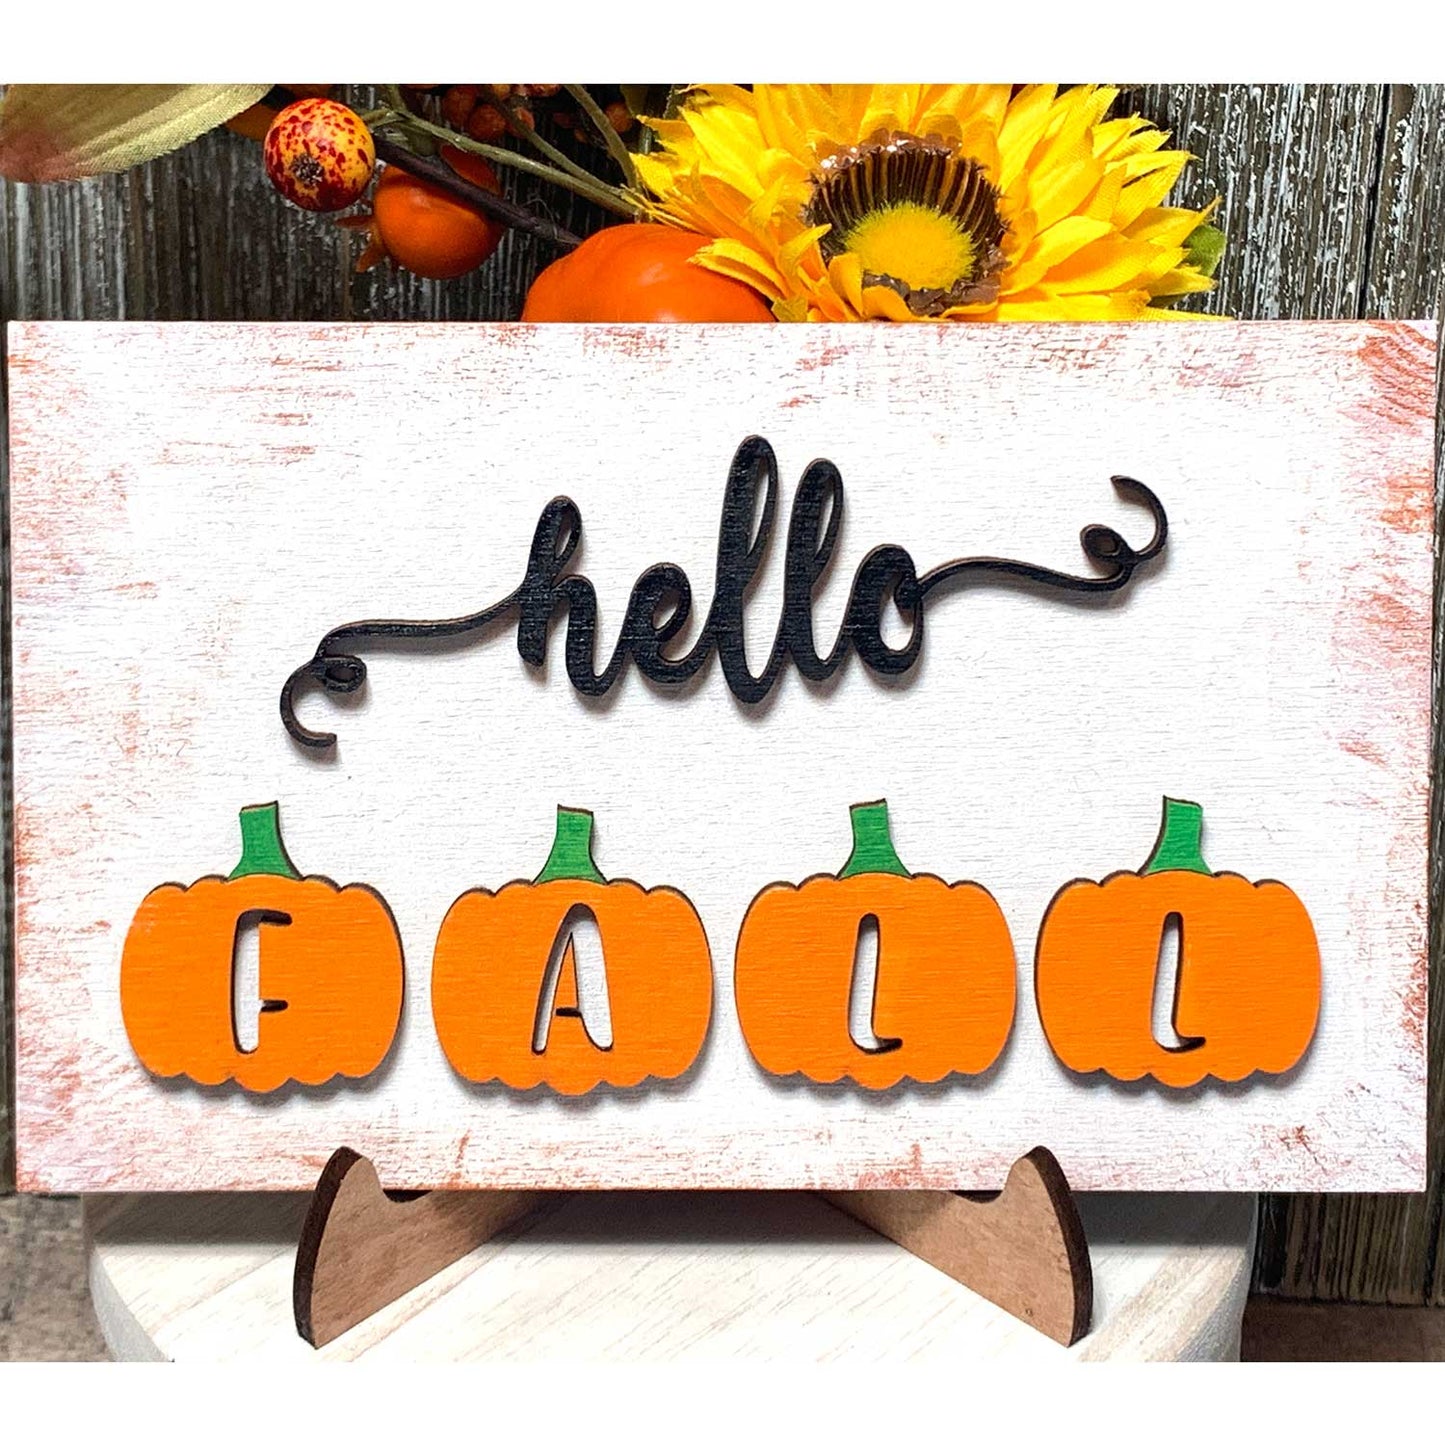 Hello Fall Sign on an Easel